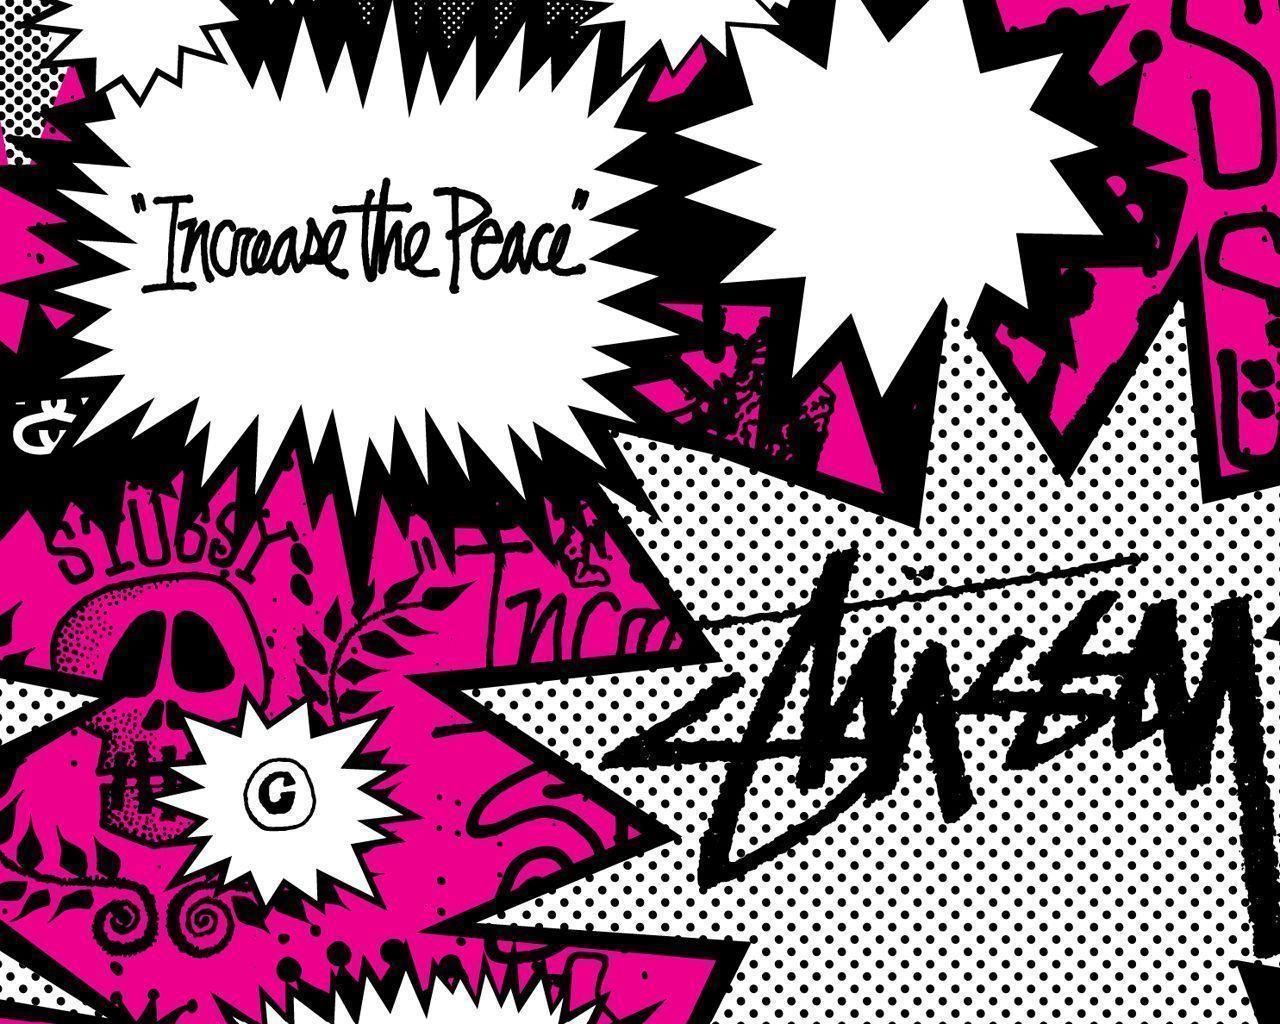 The Peace wallpaper from Punk wallpaper